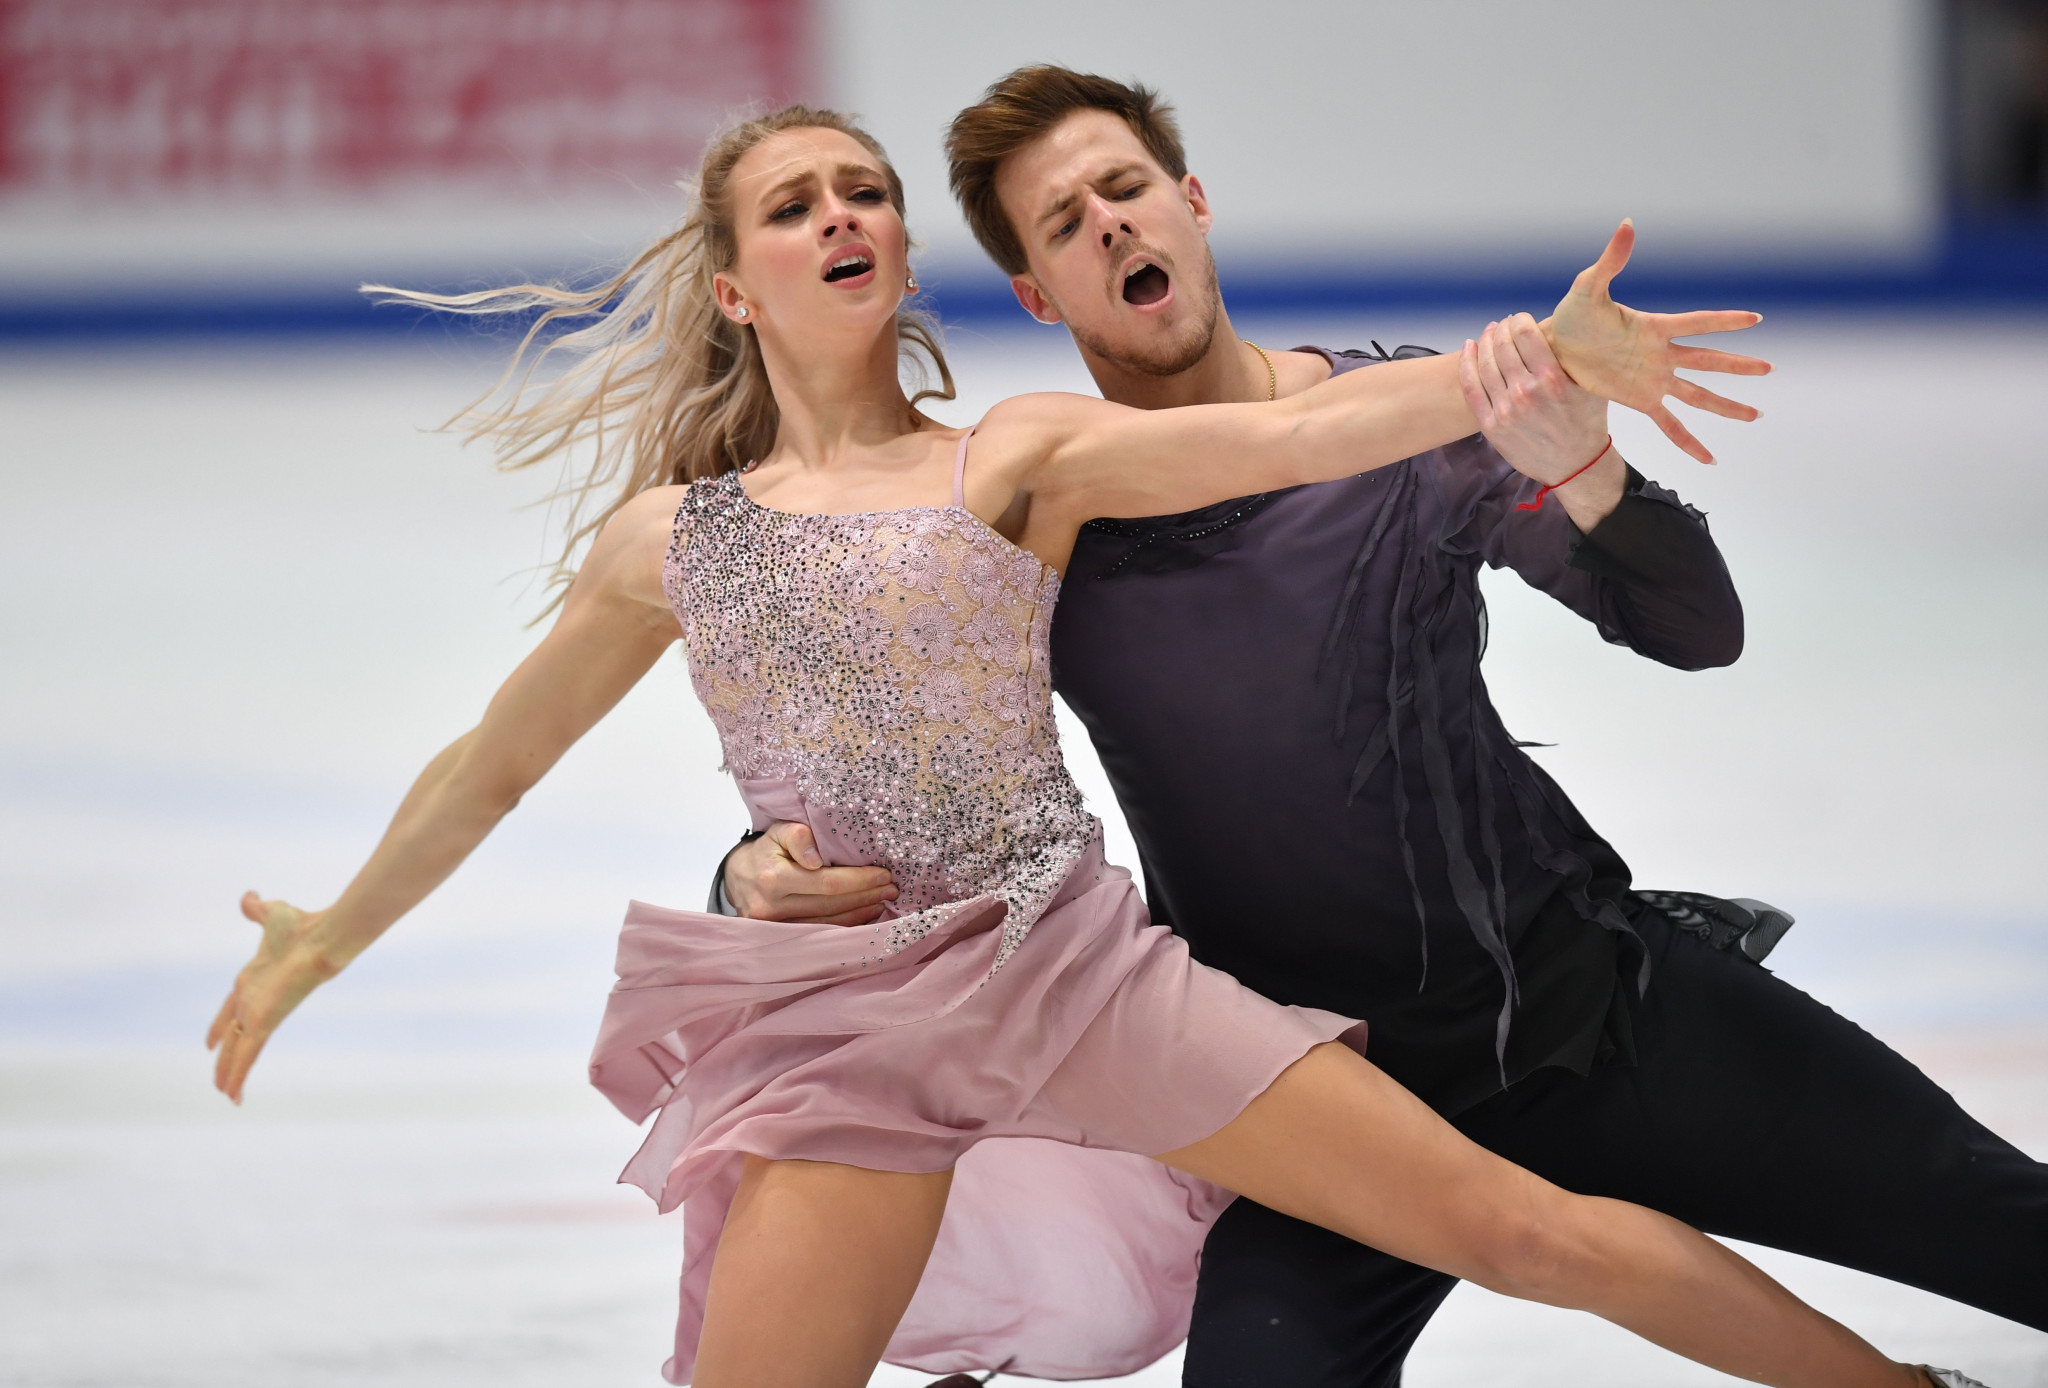 European champions Sinitsina and Katsalapov to compete at Moscow Grand Prix of Figure Skating event